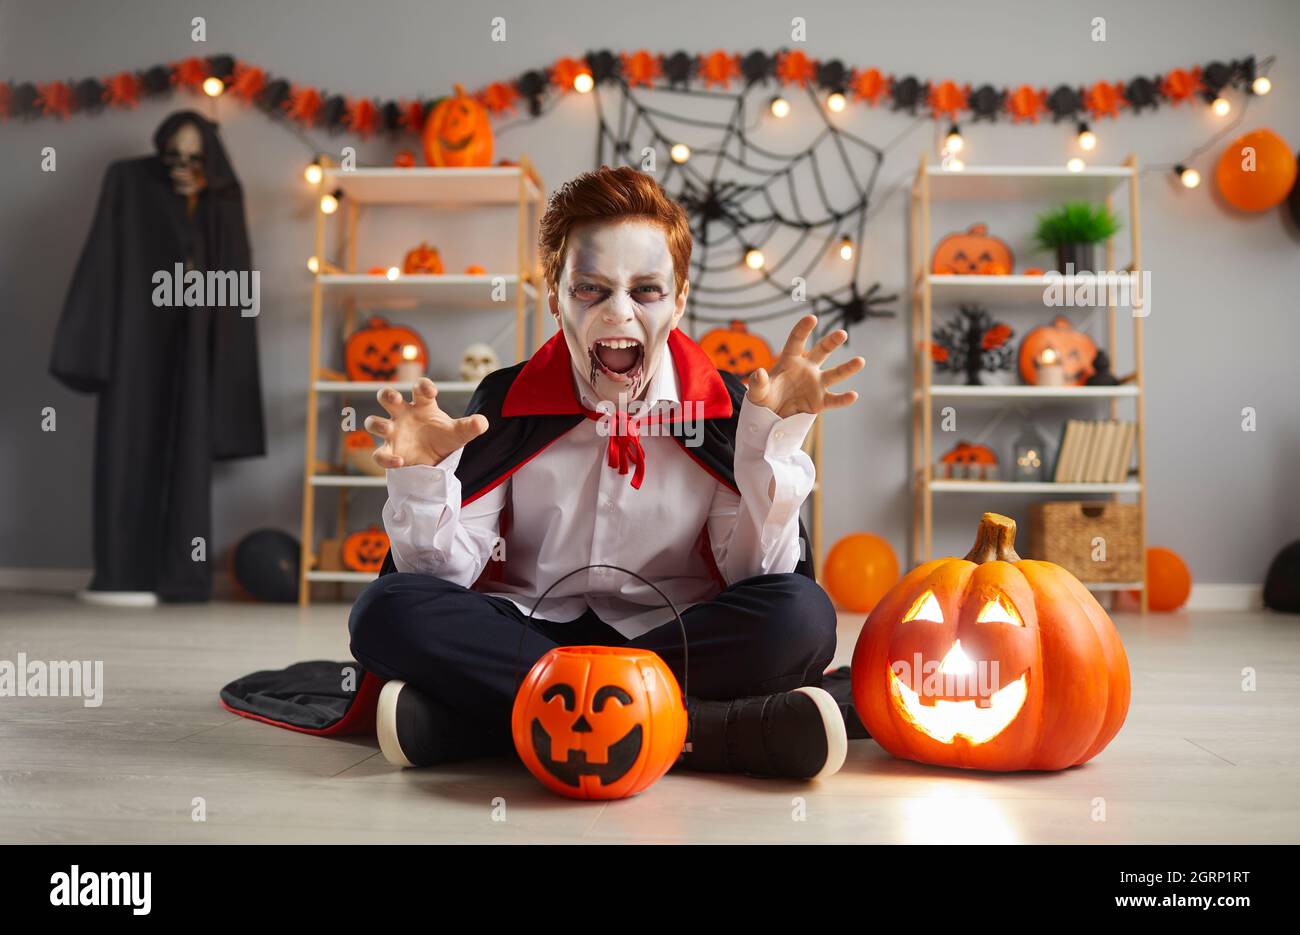 Terrifying child in traditional Halloween vampire costume who screams and scares looking at camera. Stock Photo